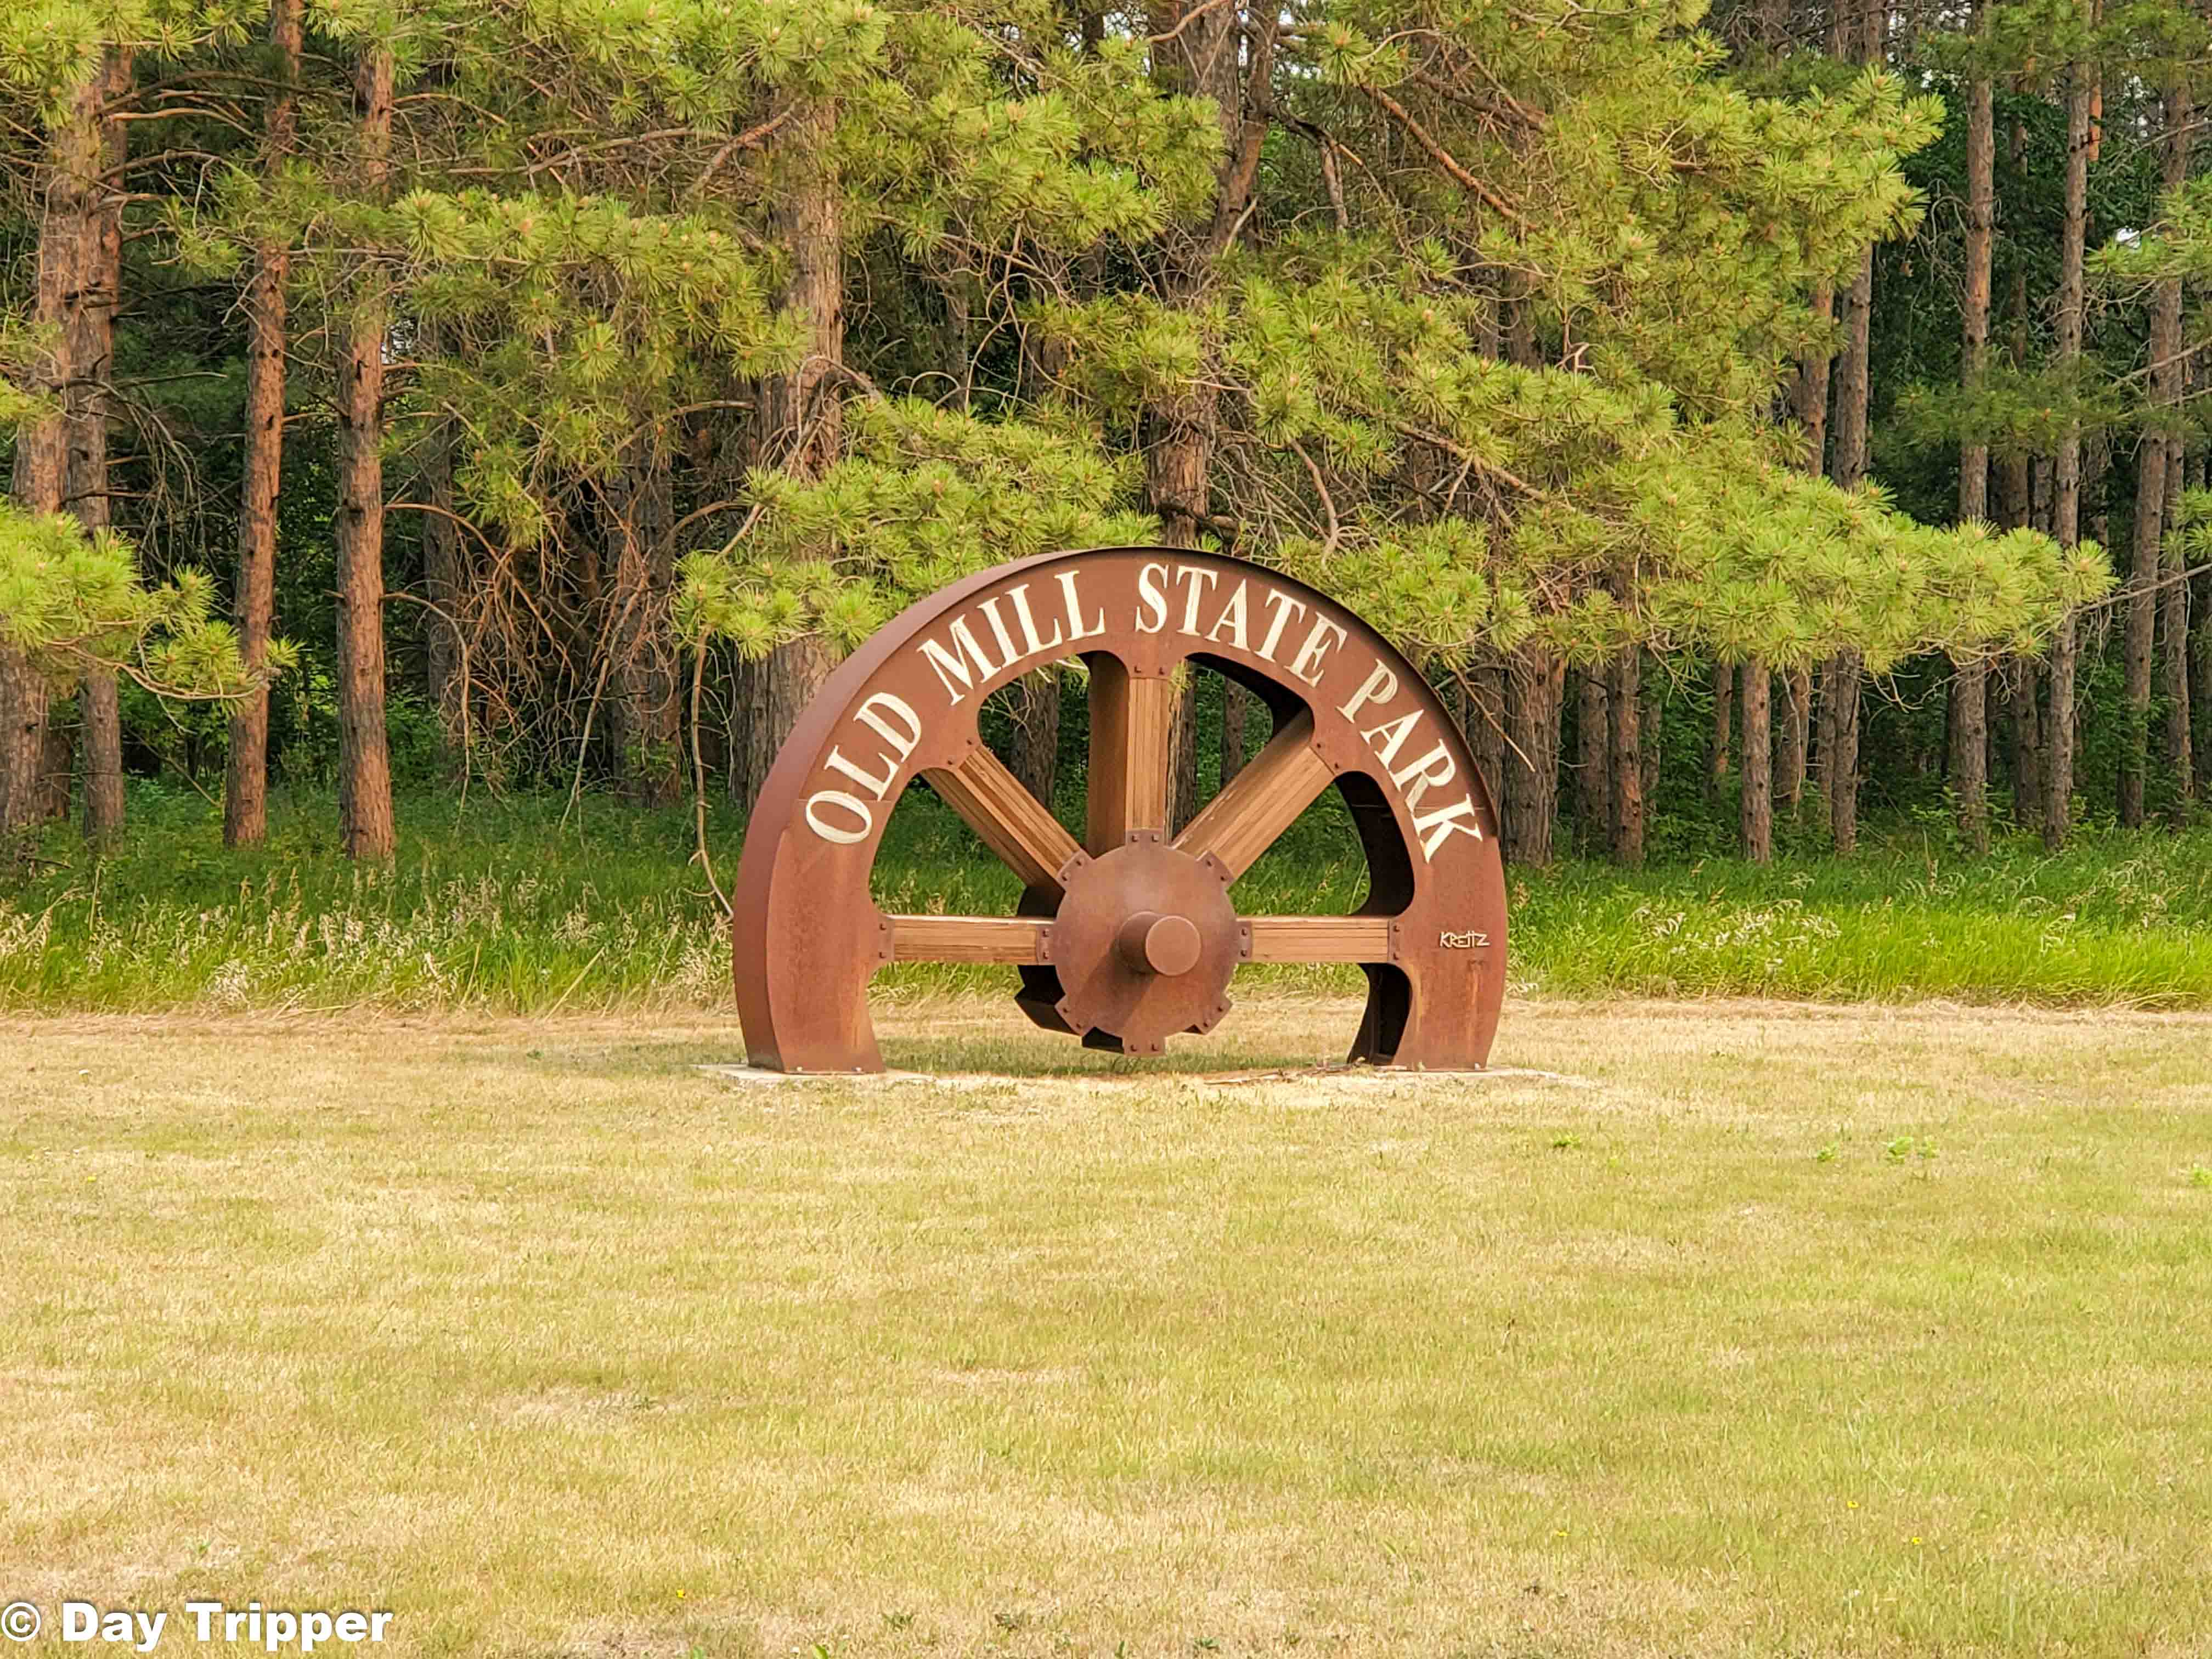 Things to do at Old Mill State Park in Northwestern MN